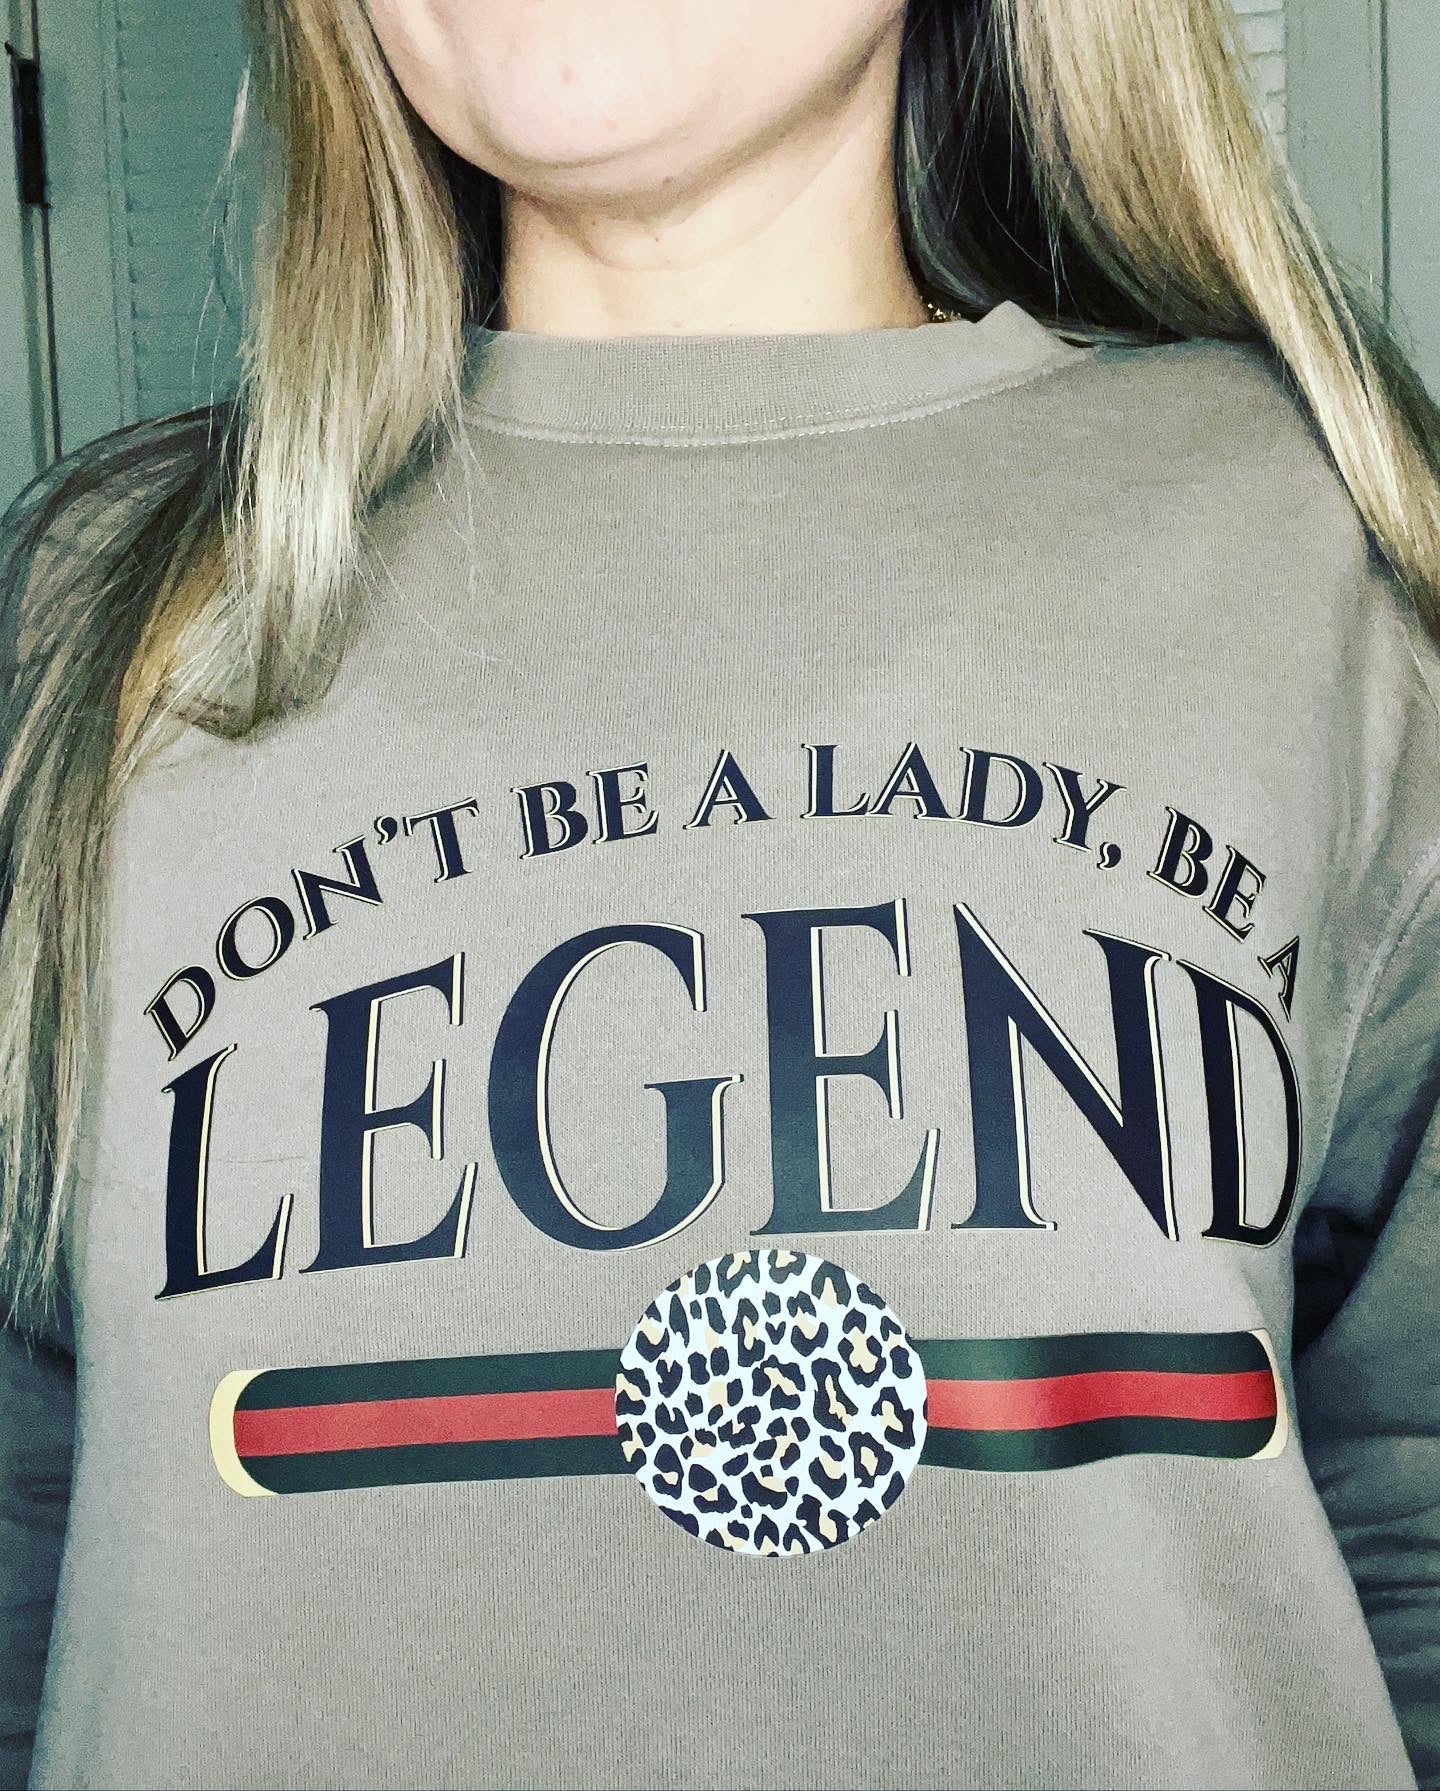 Don’t be a Lady, be a Legend soft crew neck